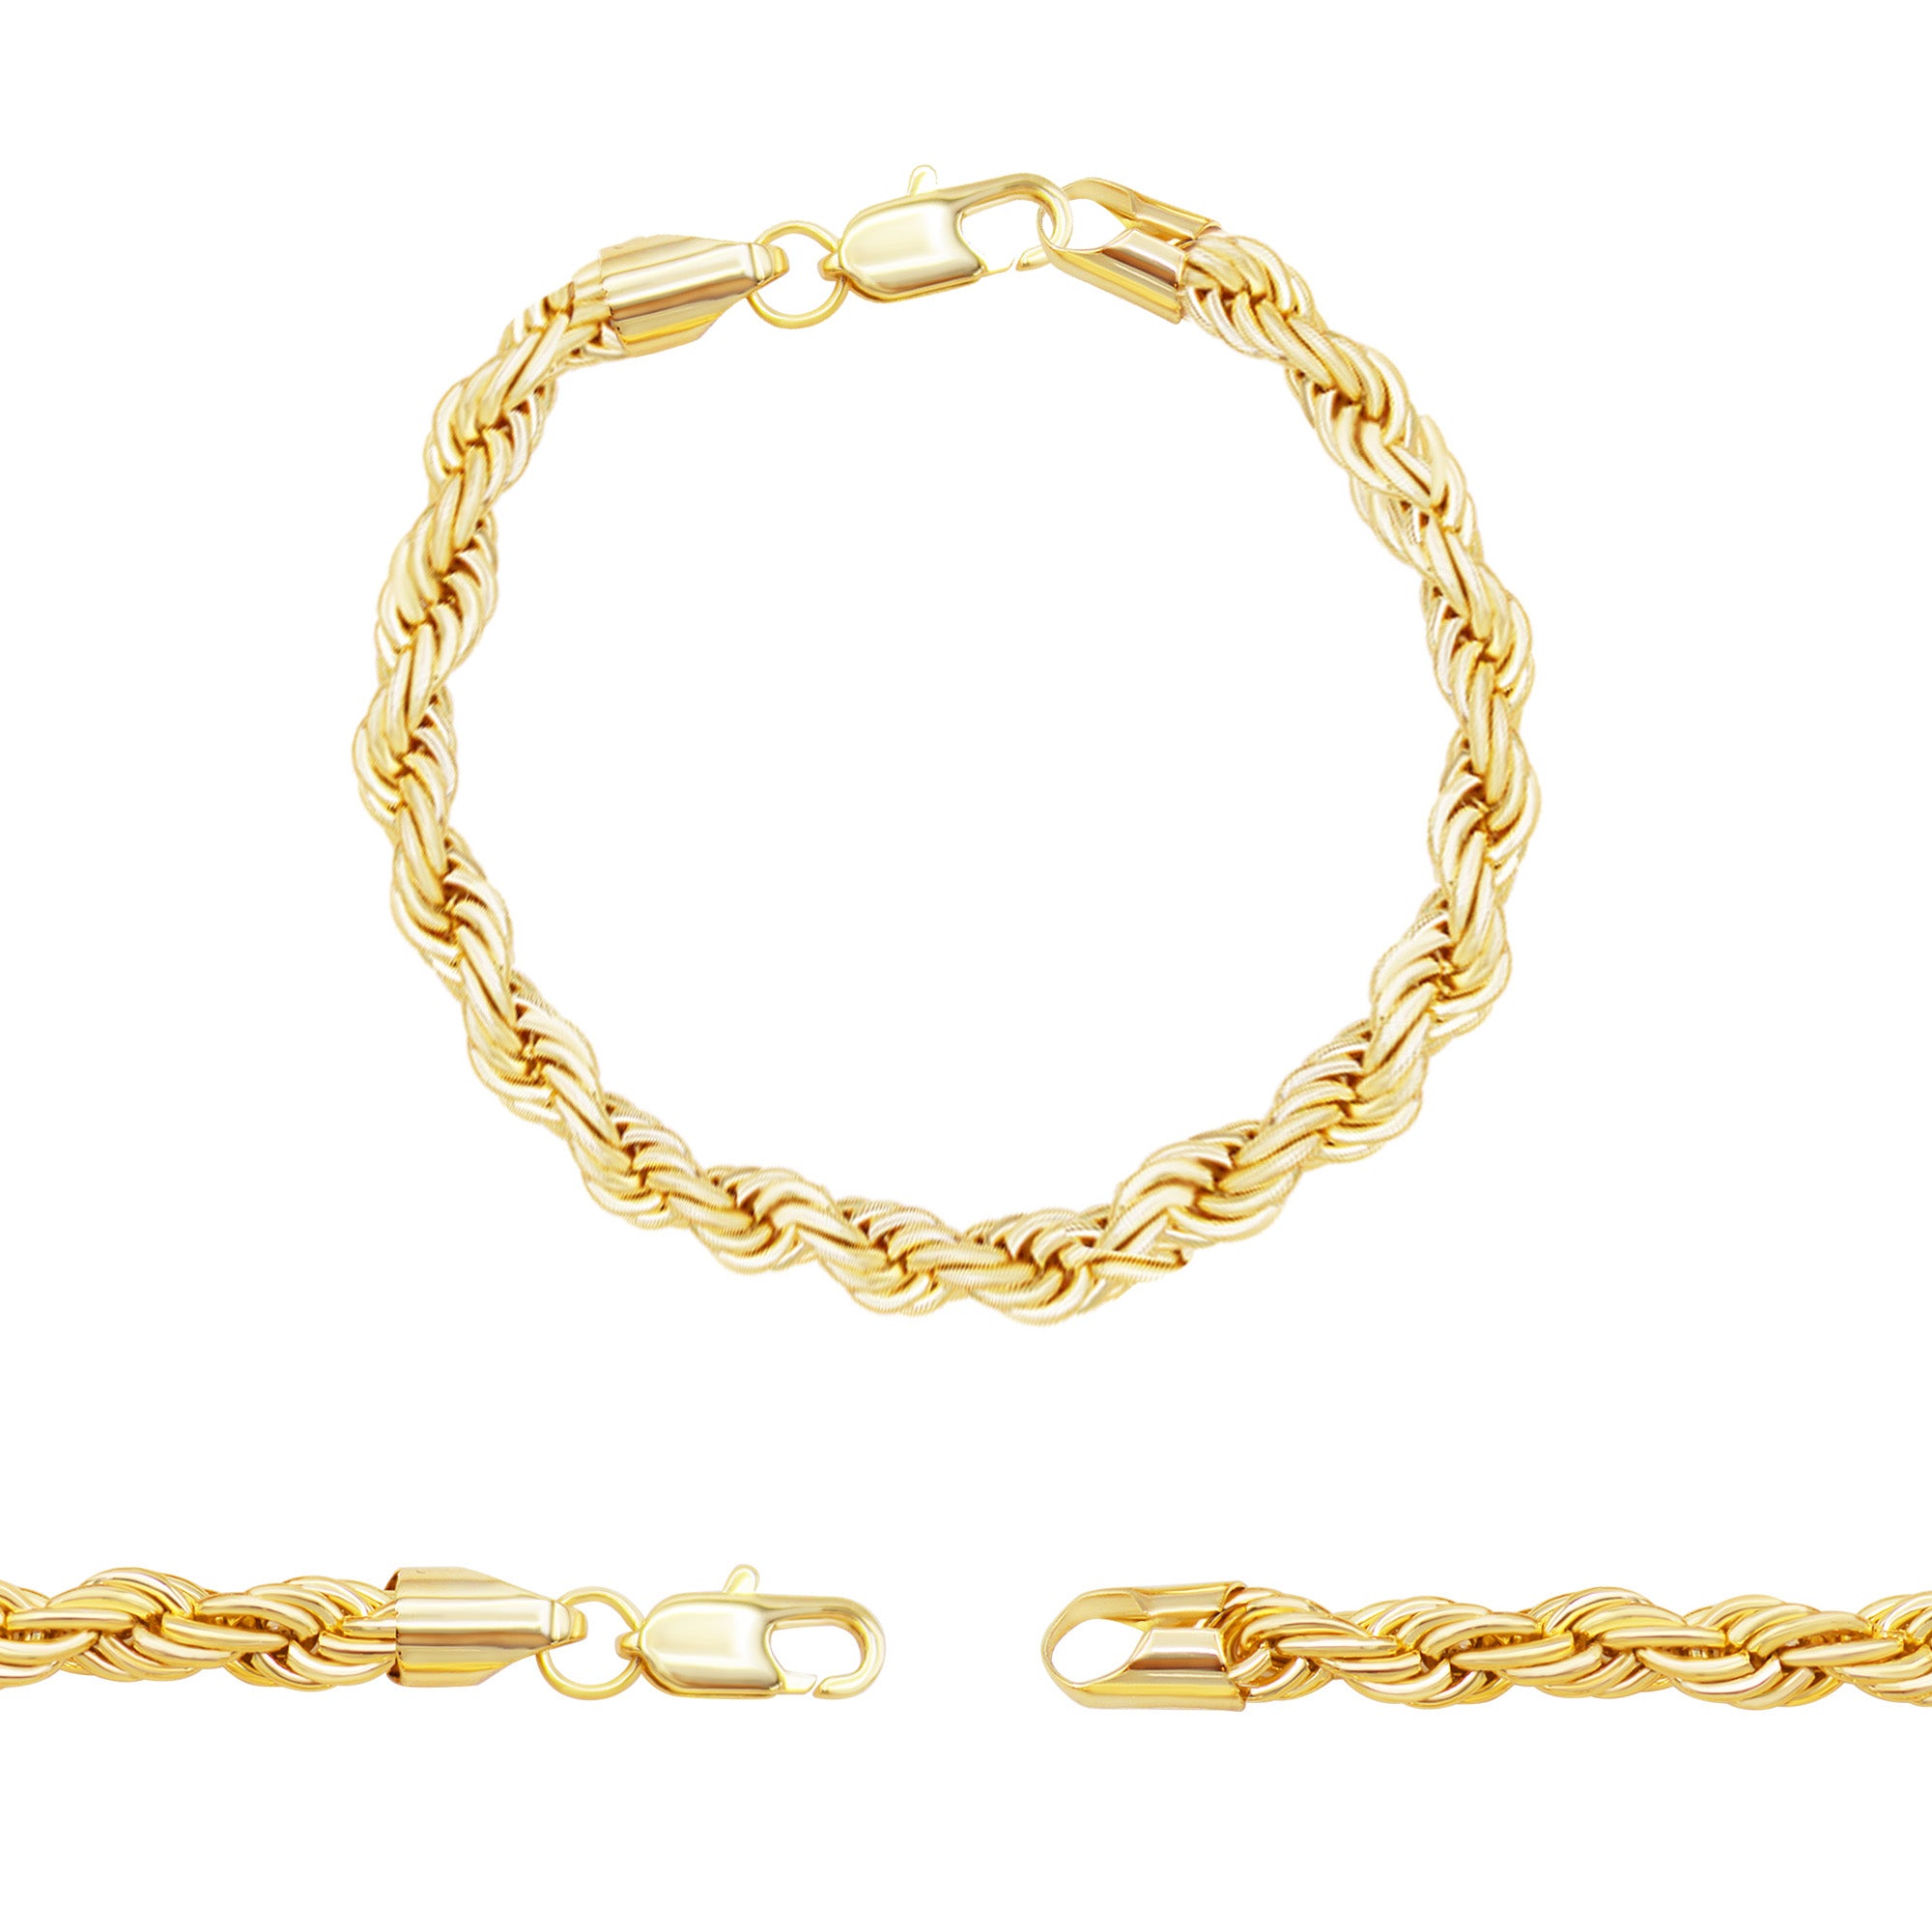 Rope Chain 14K Gold Filled Bracelet 8.5" Set Lobster Claw Clasp Men Jewelry 5 mm 6 mm